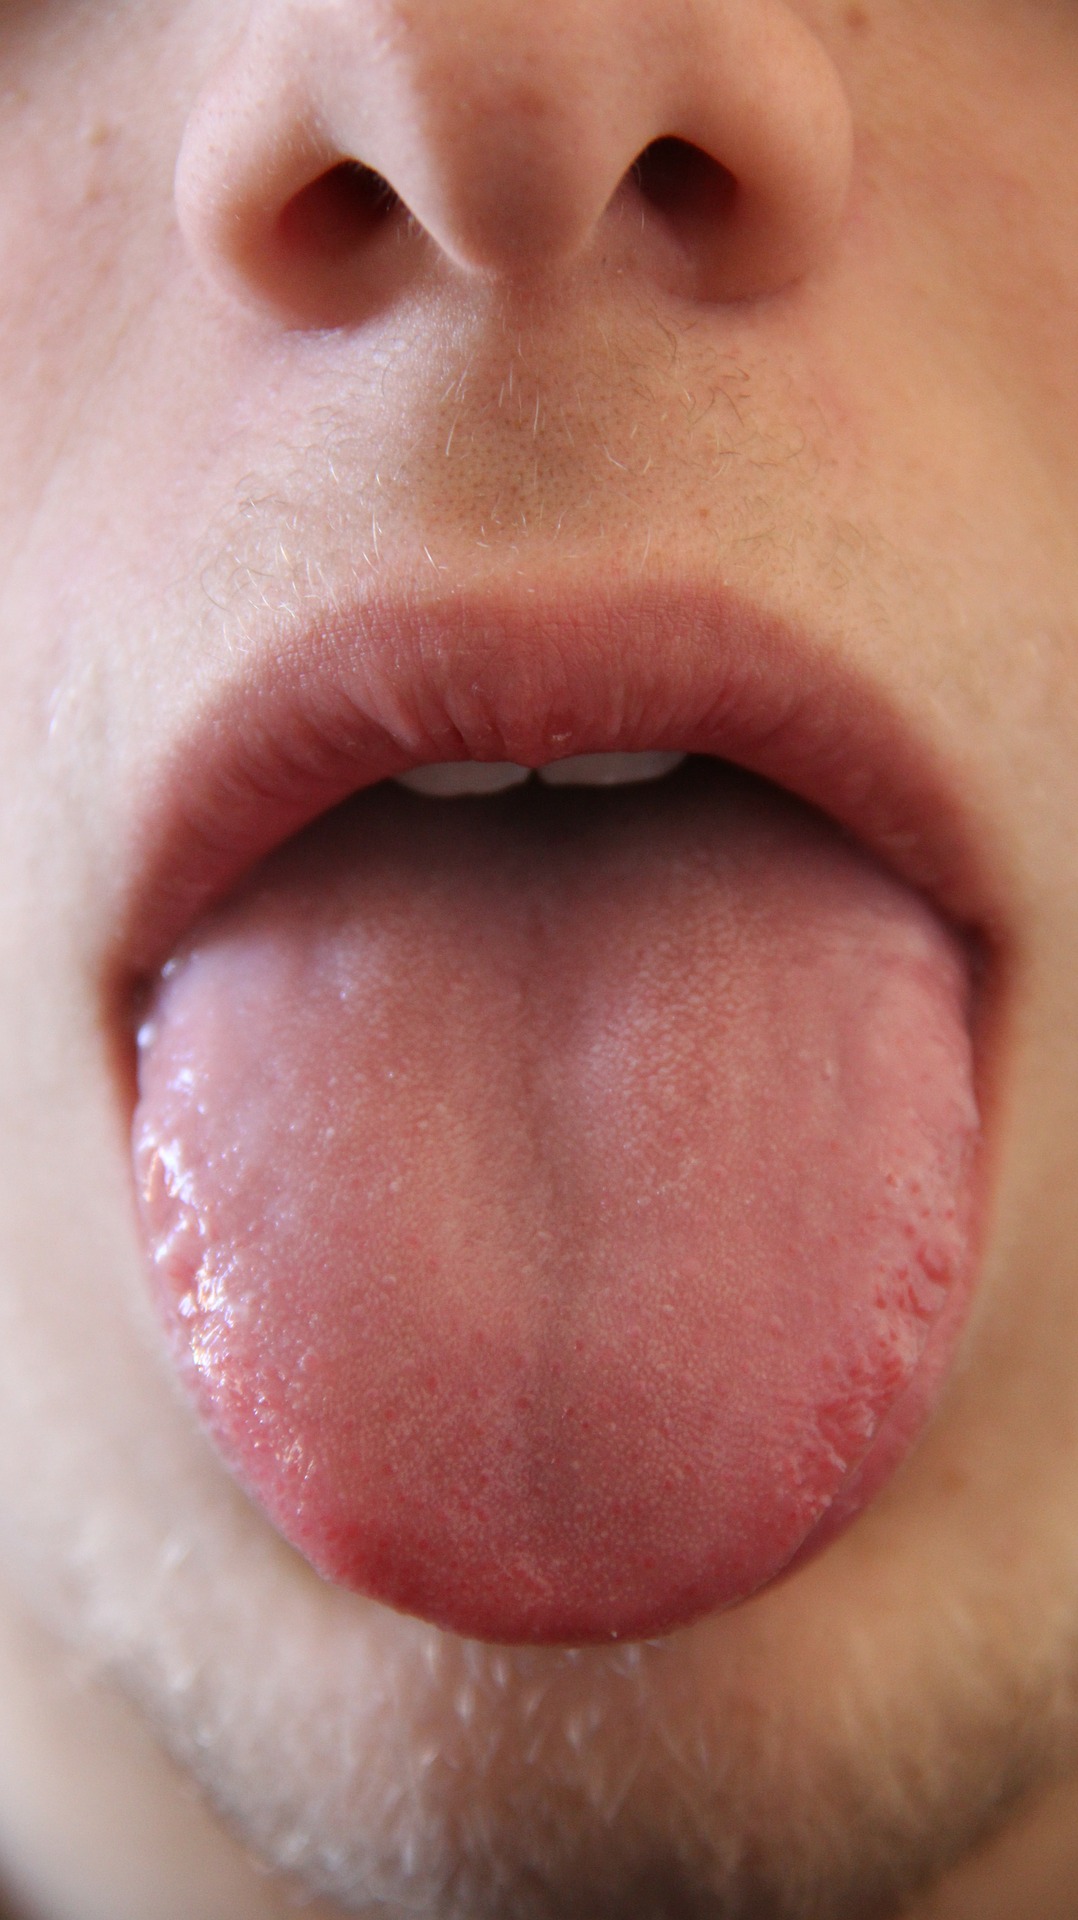 Tongue damage after excessive energy drink consumption